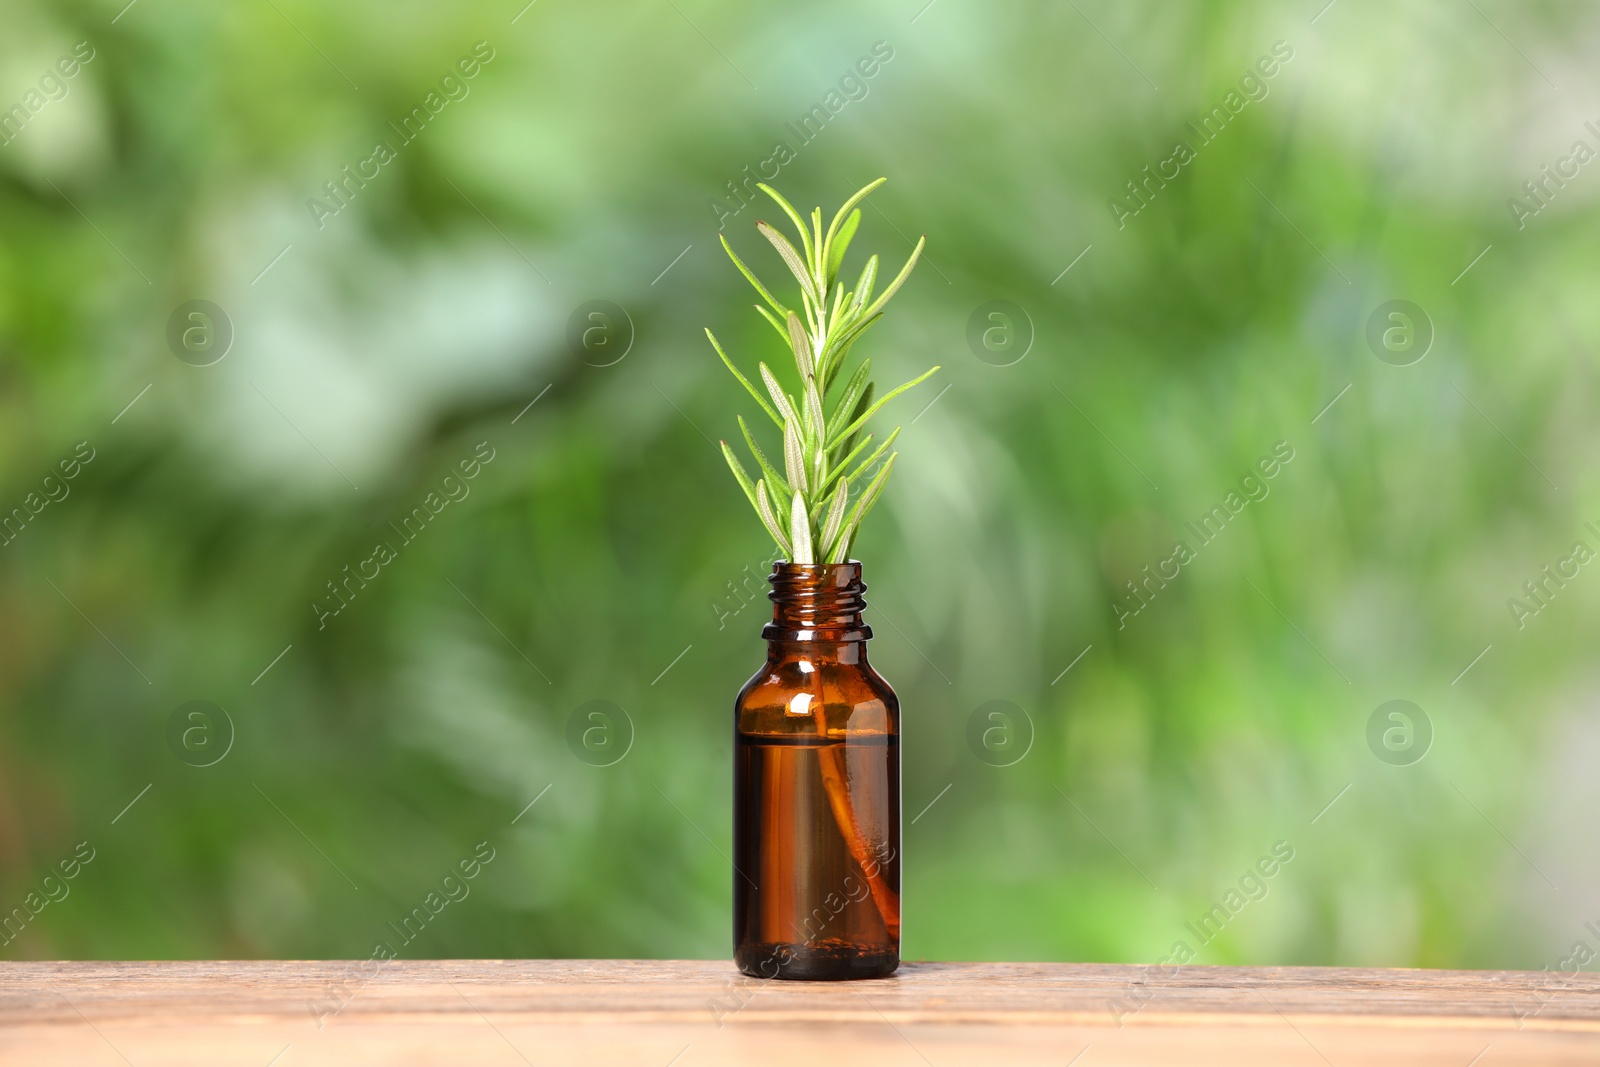 Photo of Bottle with essential oil and rosemary on wooden table against blurred green background